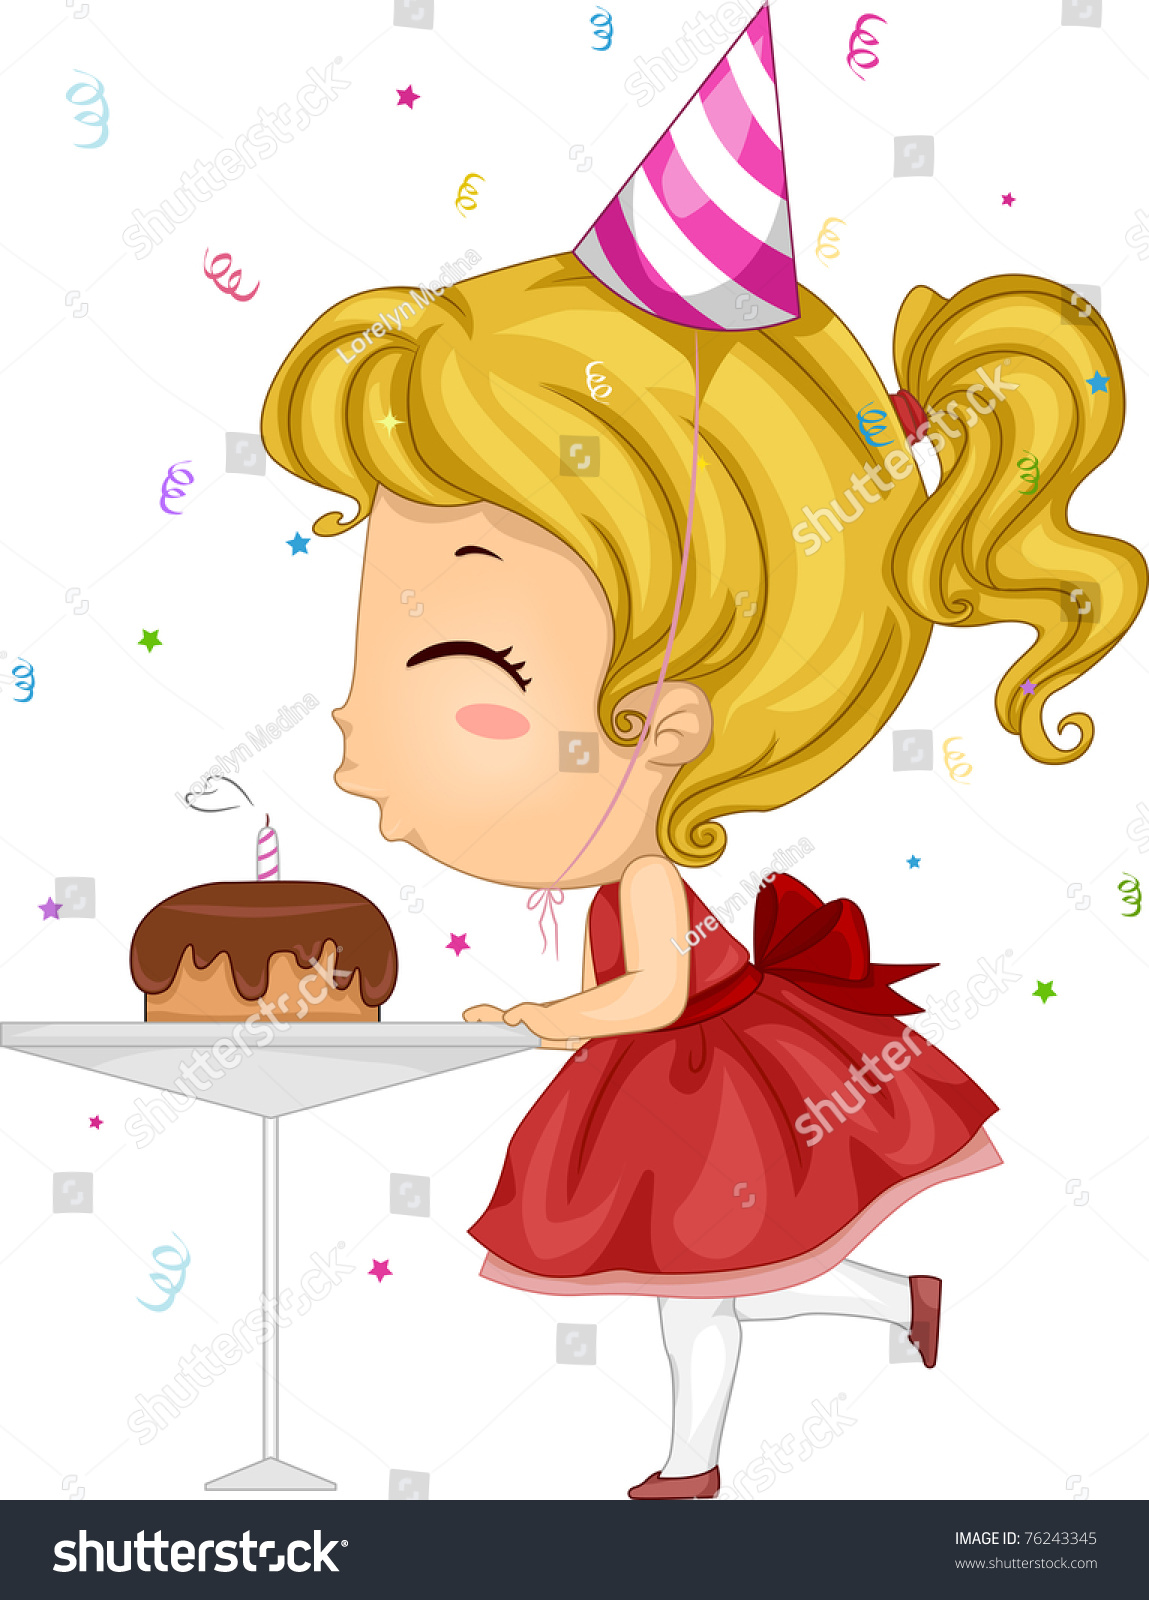 Illustration Of A Girl Blowing Her Birthday Candle - 76243345 ...